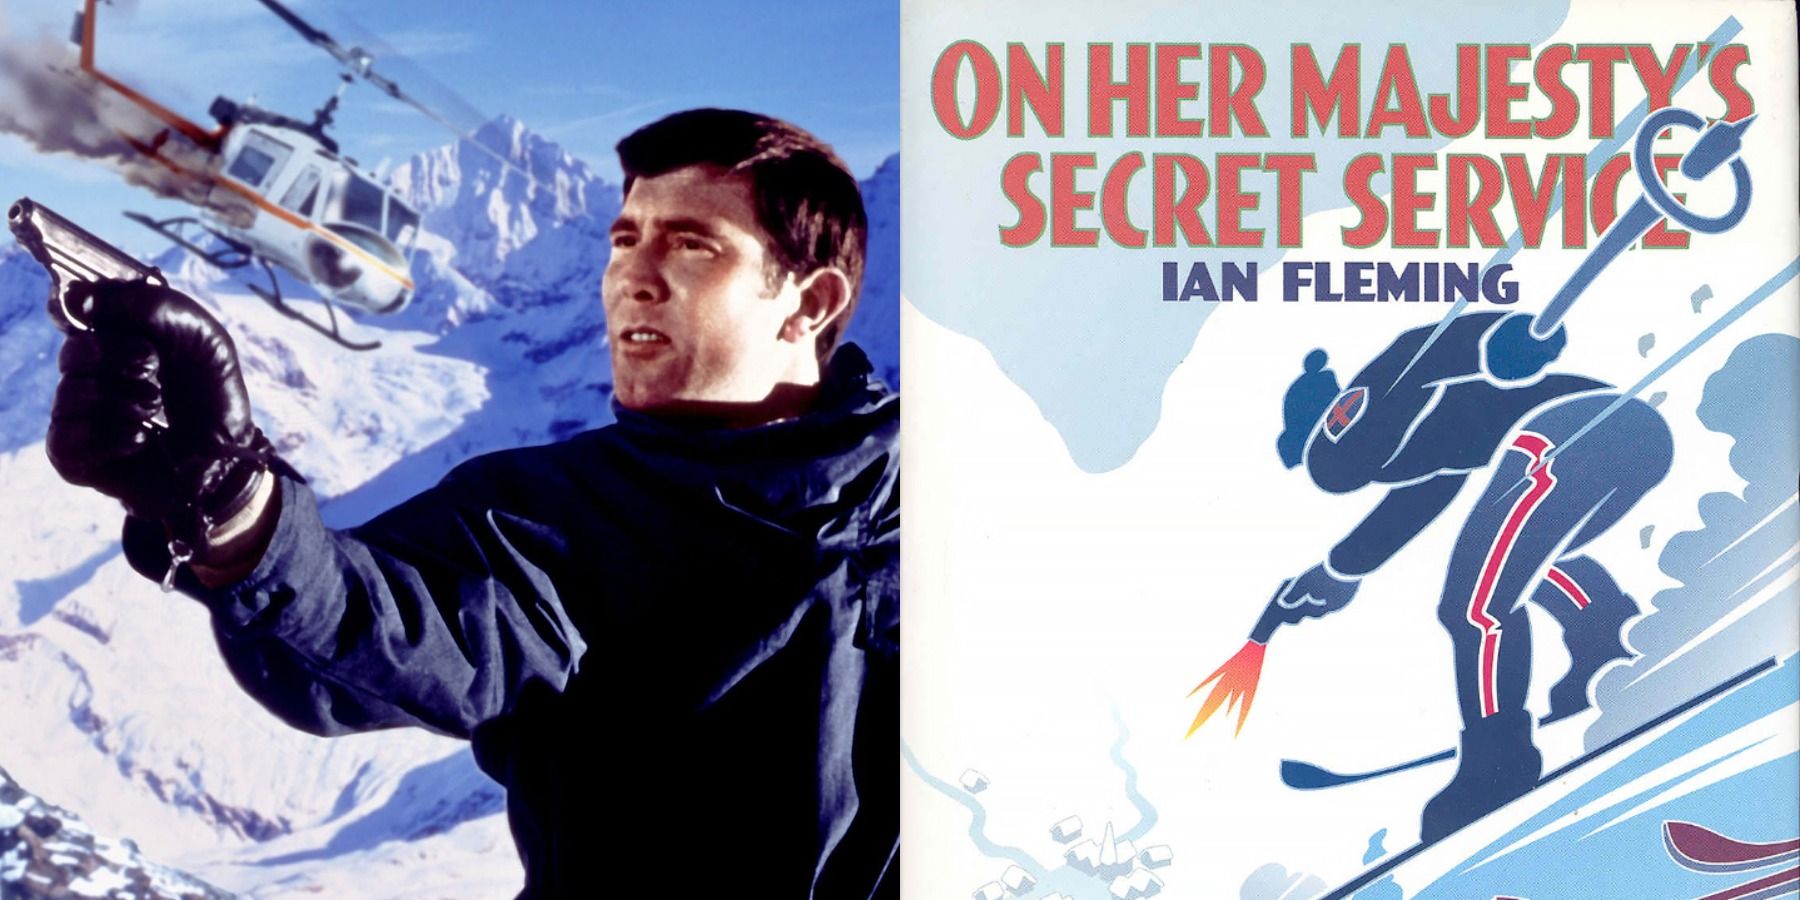 George Lazenby as James Bond and the cover of OHMSS.